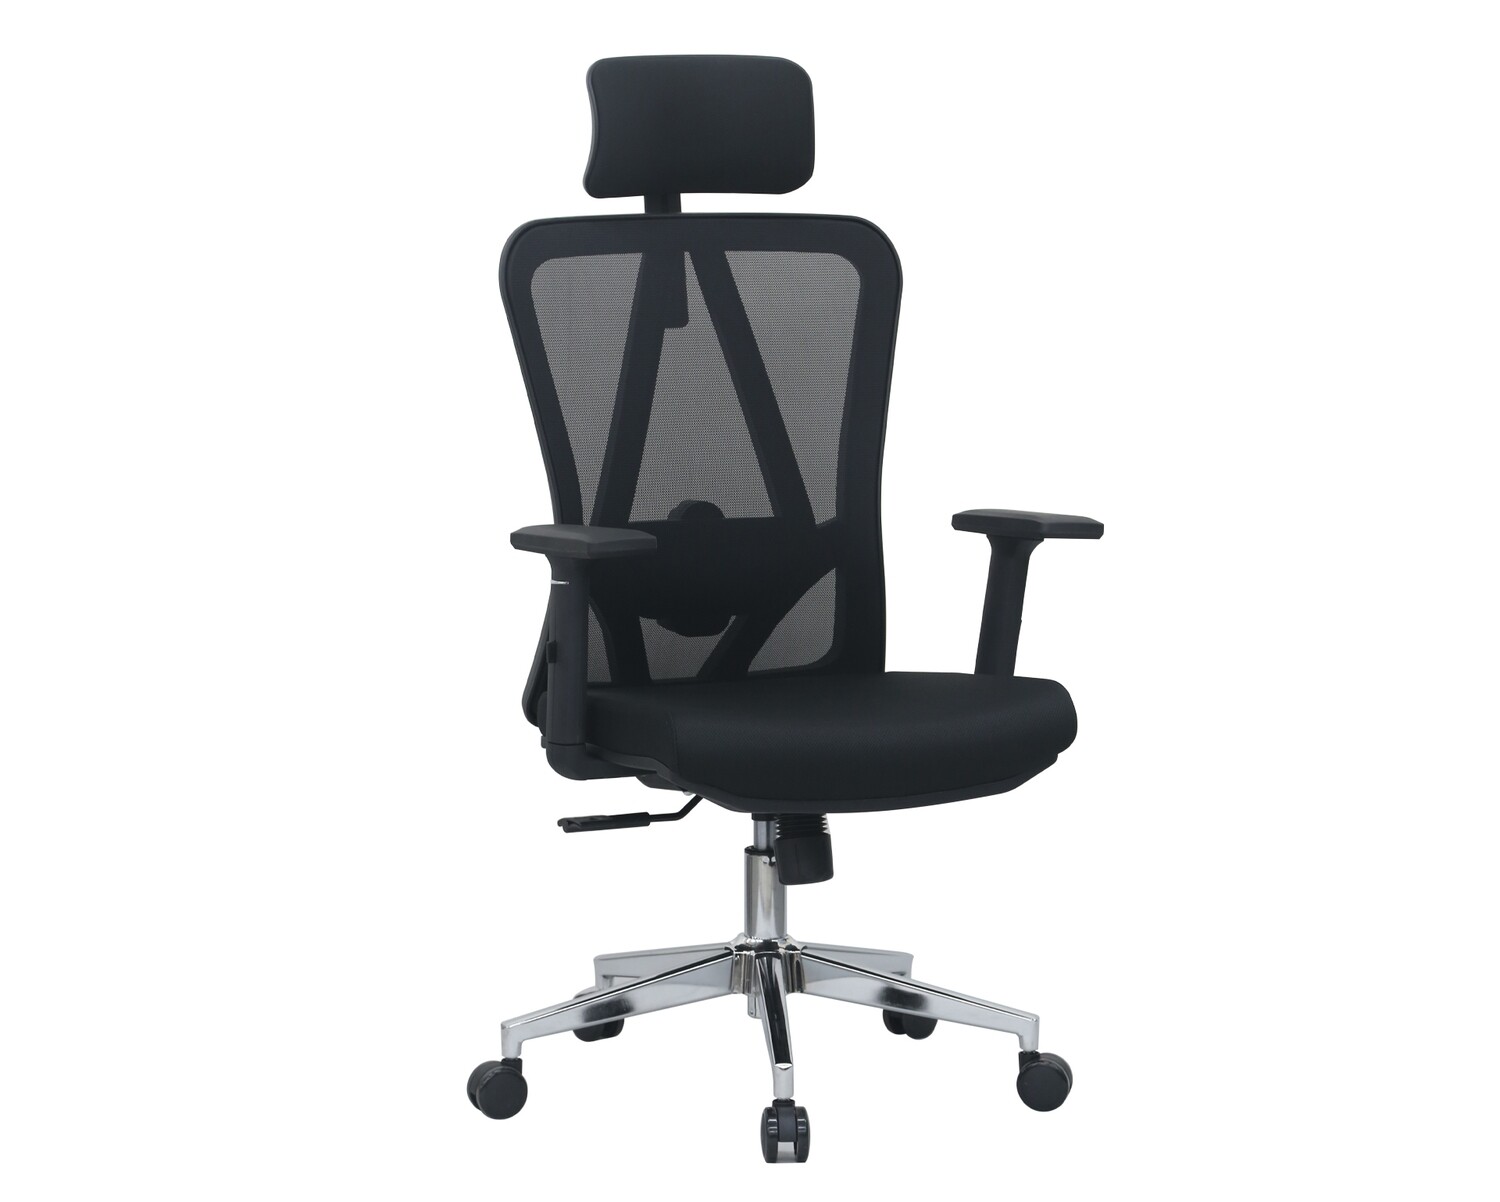 XTM Deluxe-D18/ D18F (With Footrest/ Without Footrest) Mesh Chair (Black, Grey) (2 Years Warranty)